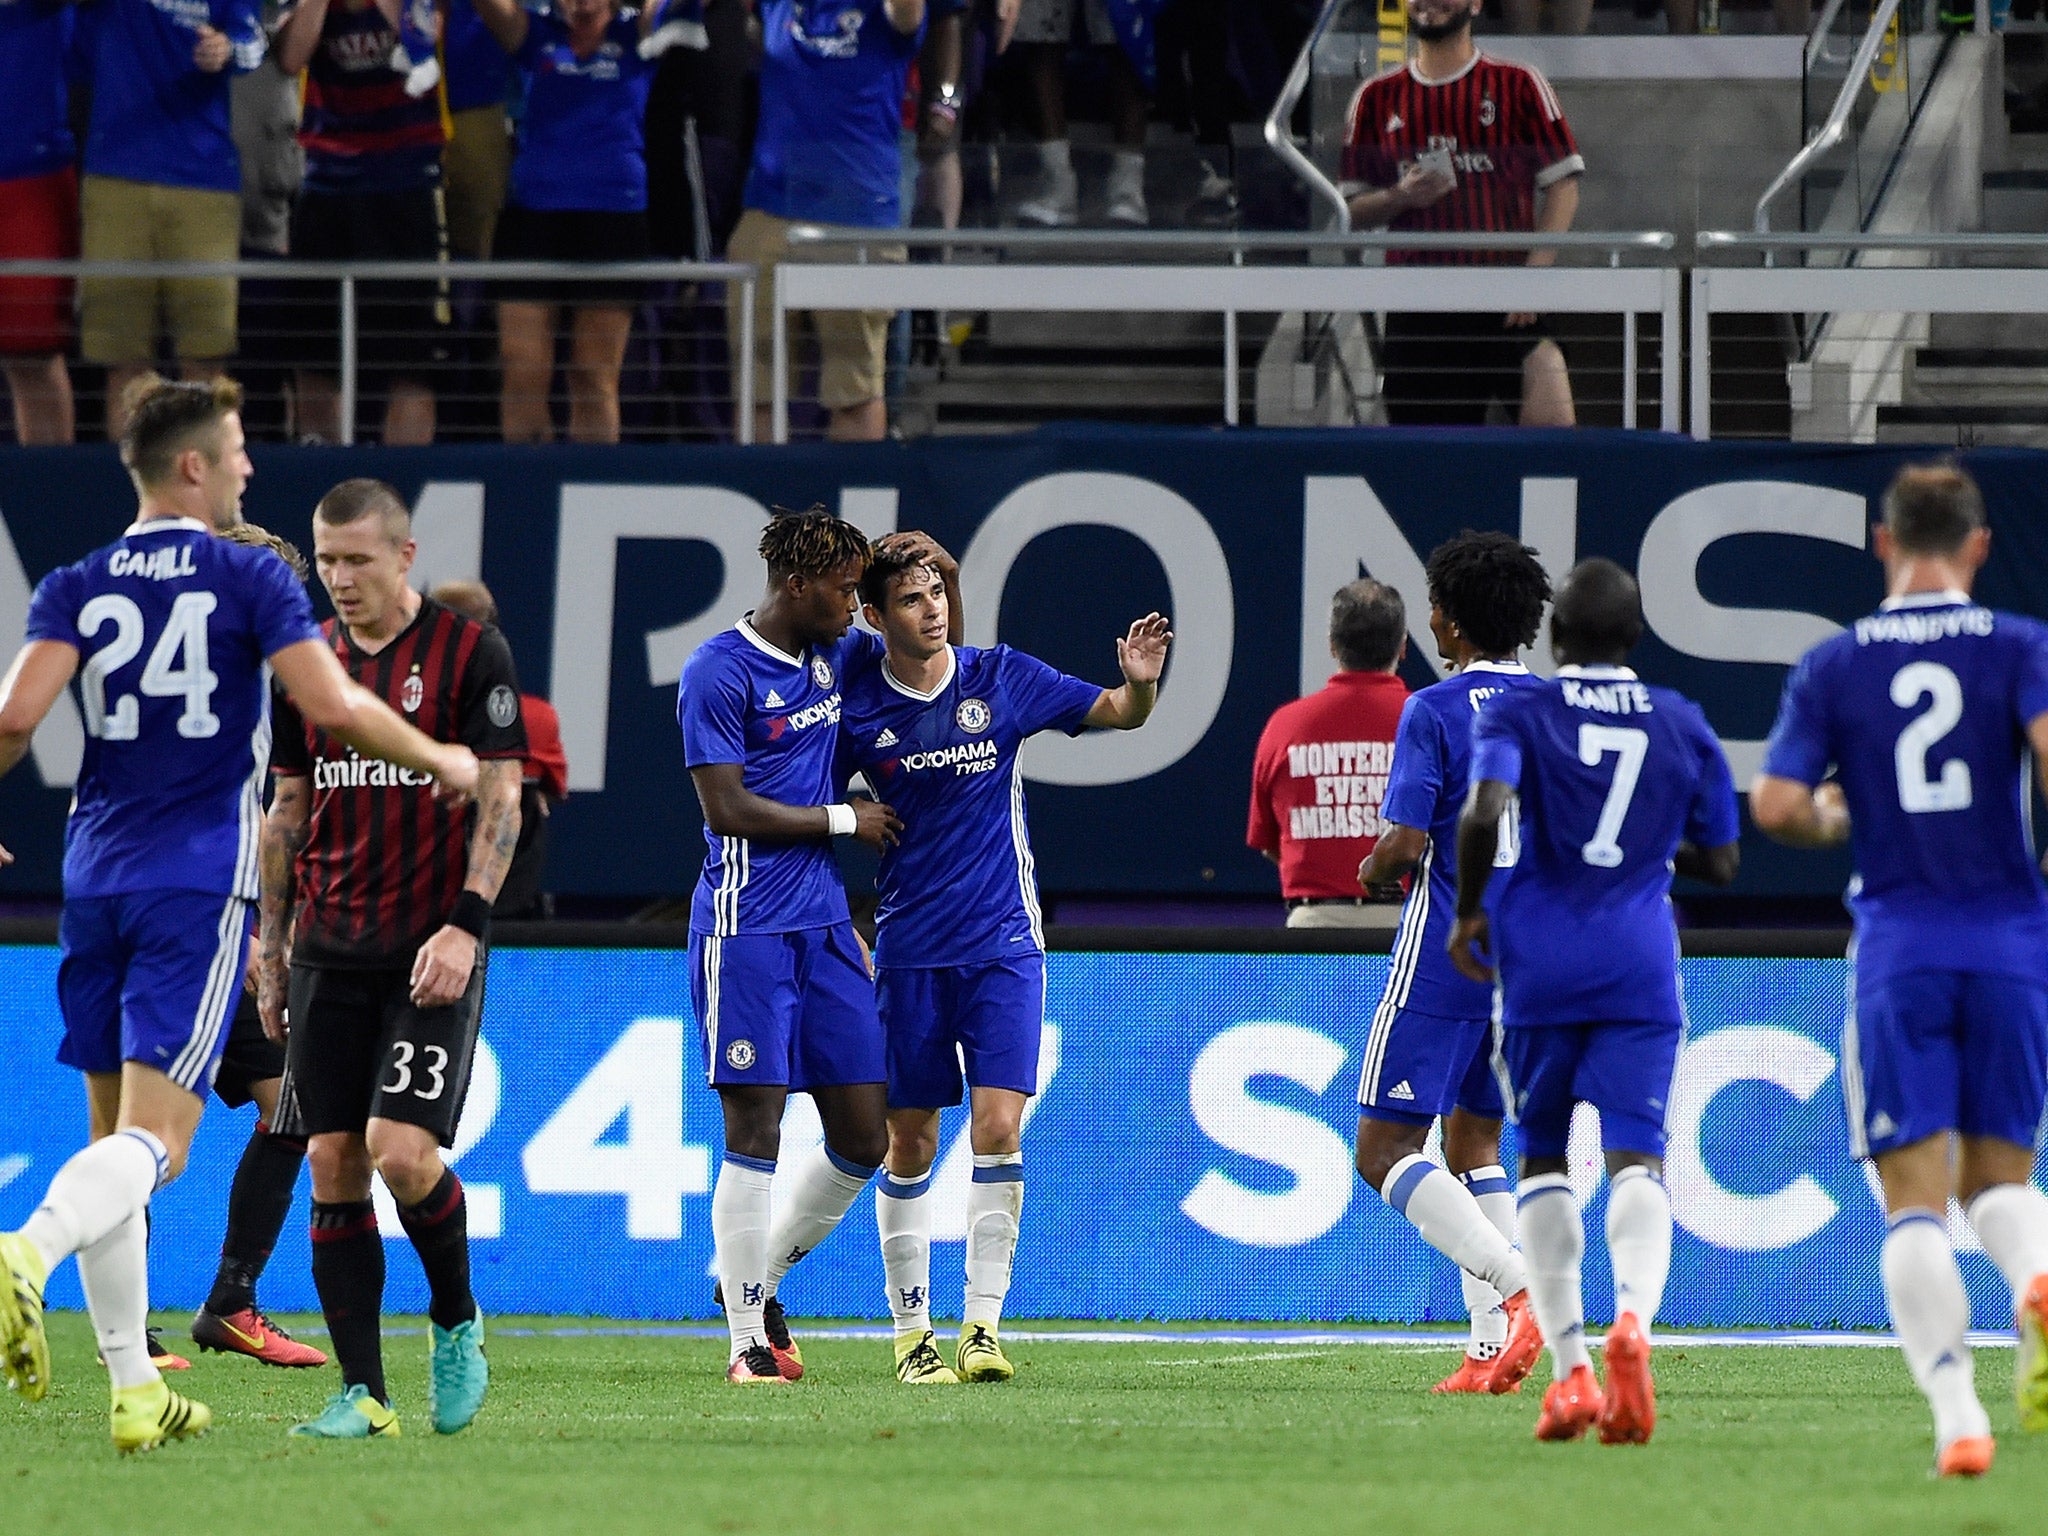 Oscar celebrates with his Chelsea teammates after scoring his second goal against AC Milan